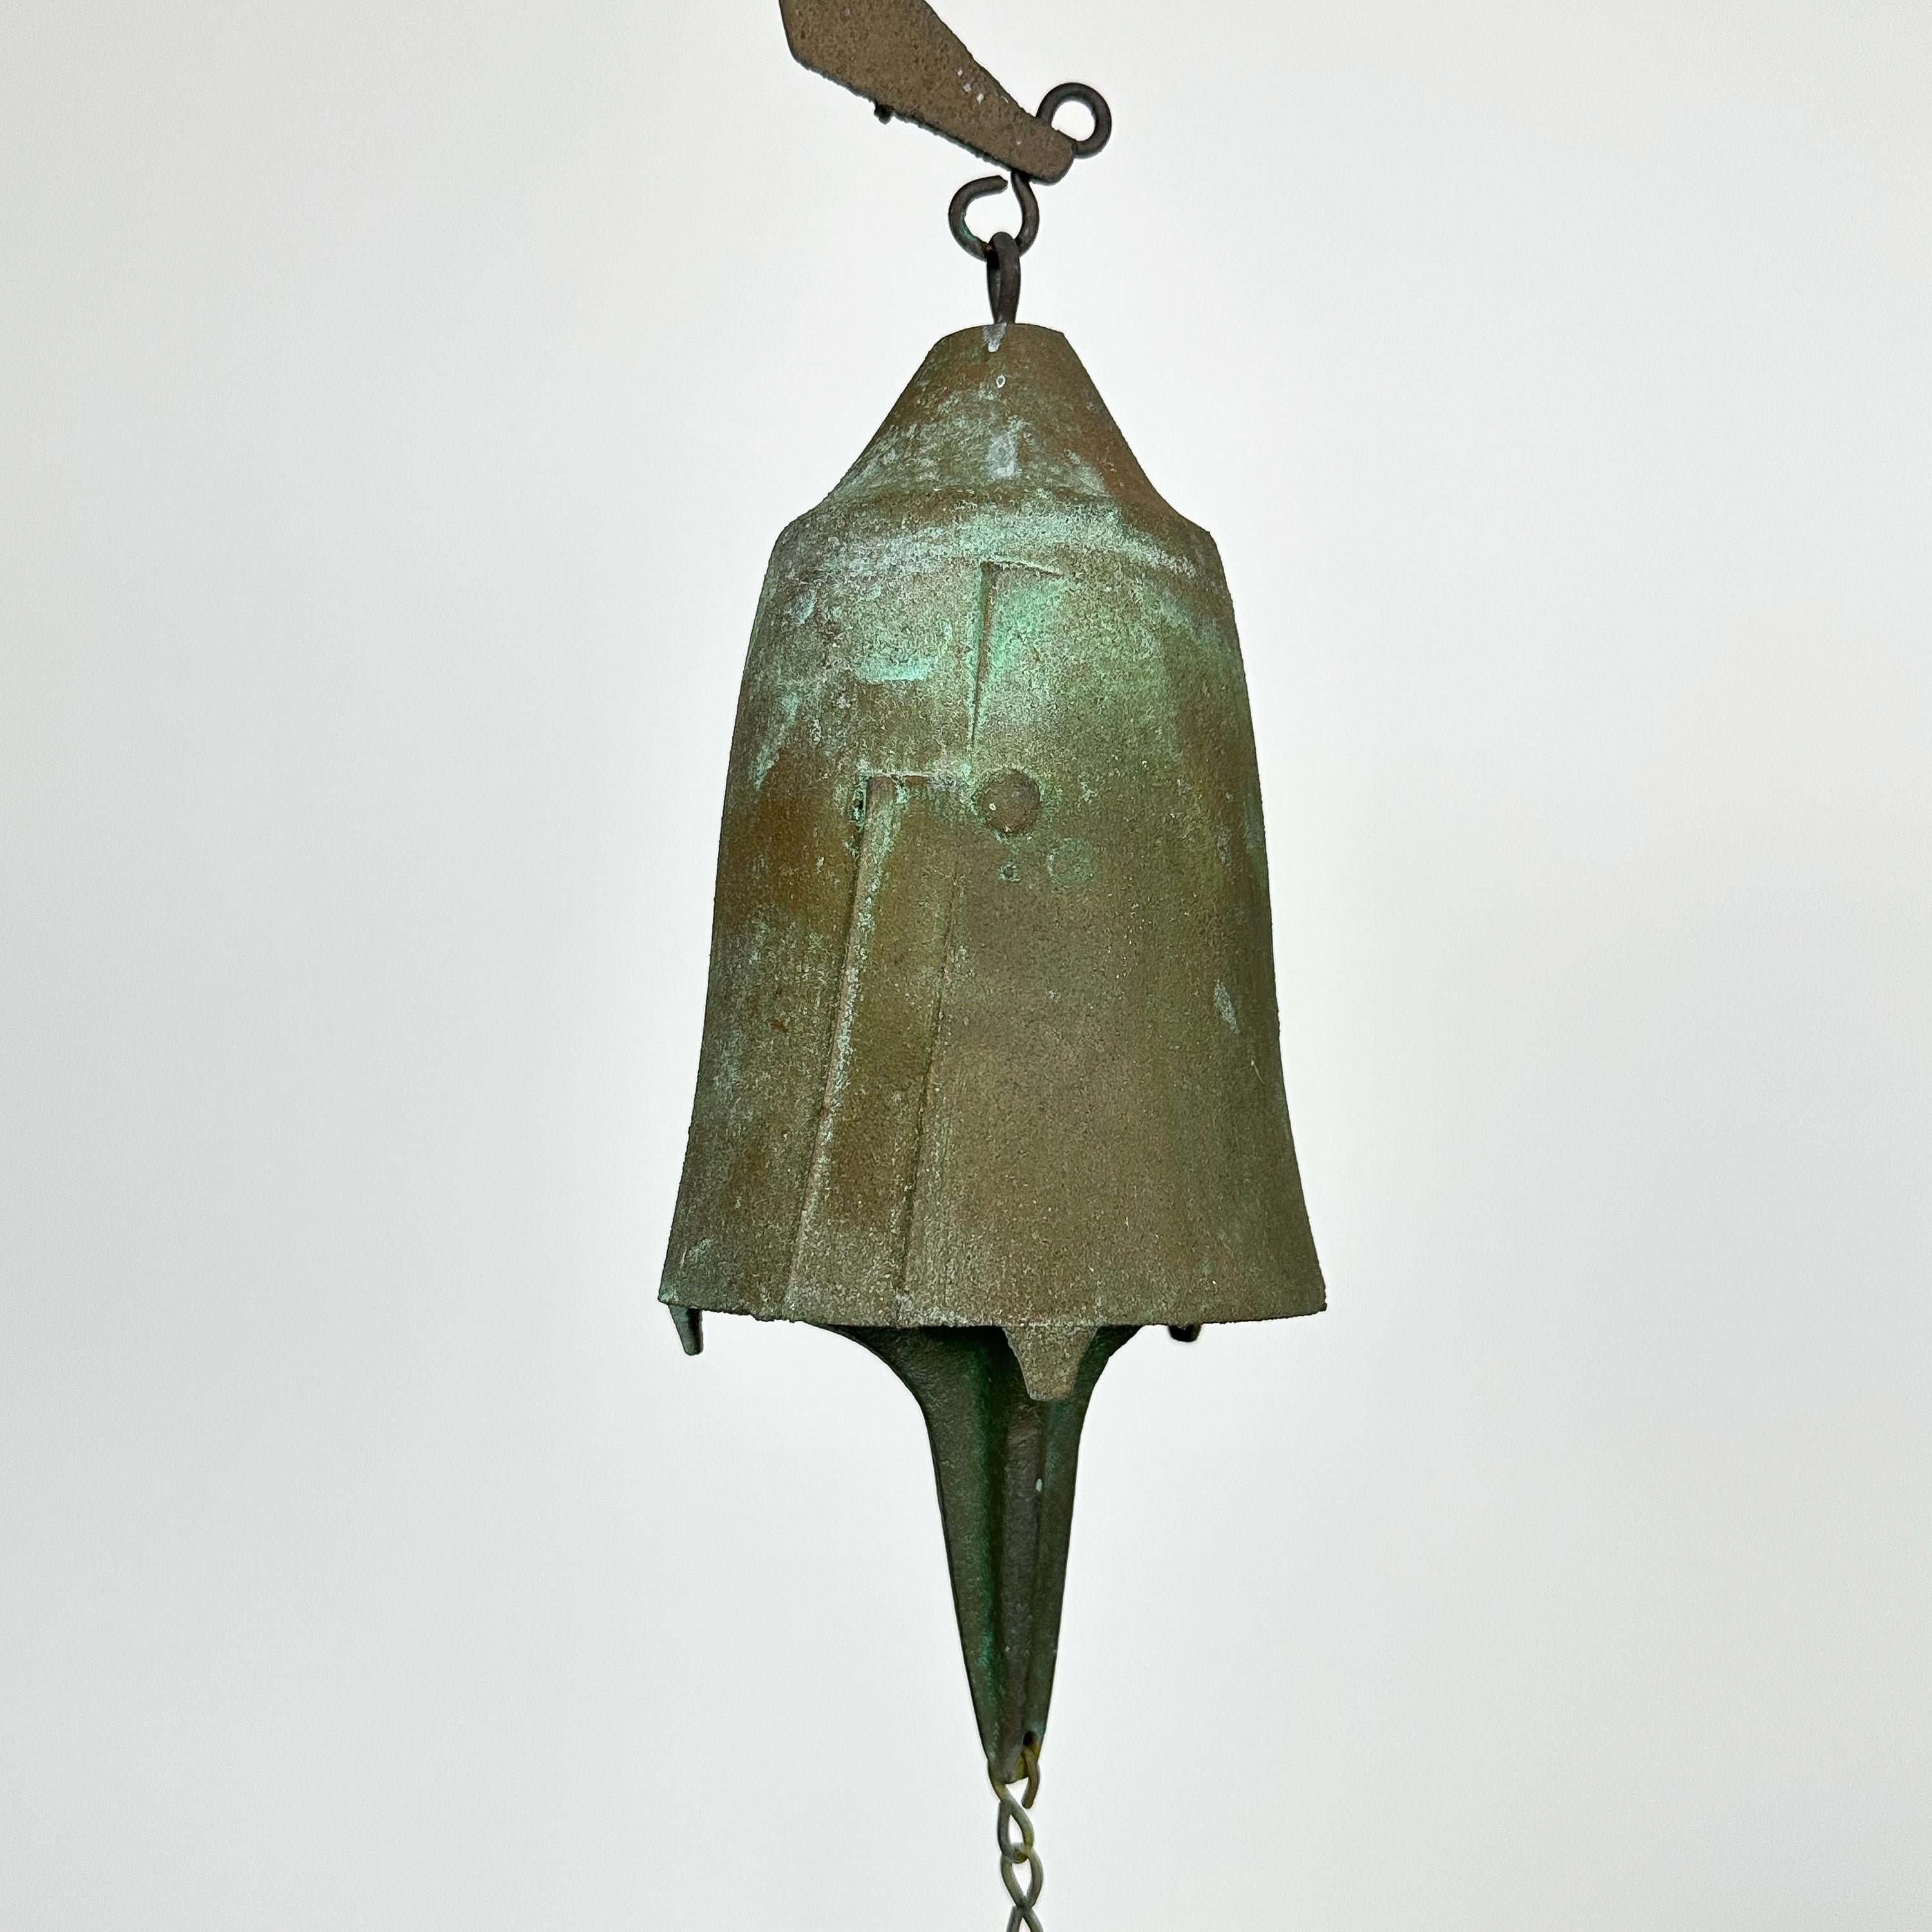 Set of 3 Bronze Bells / Wind Chimes by Paolo Soleri for Arcosanti 5